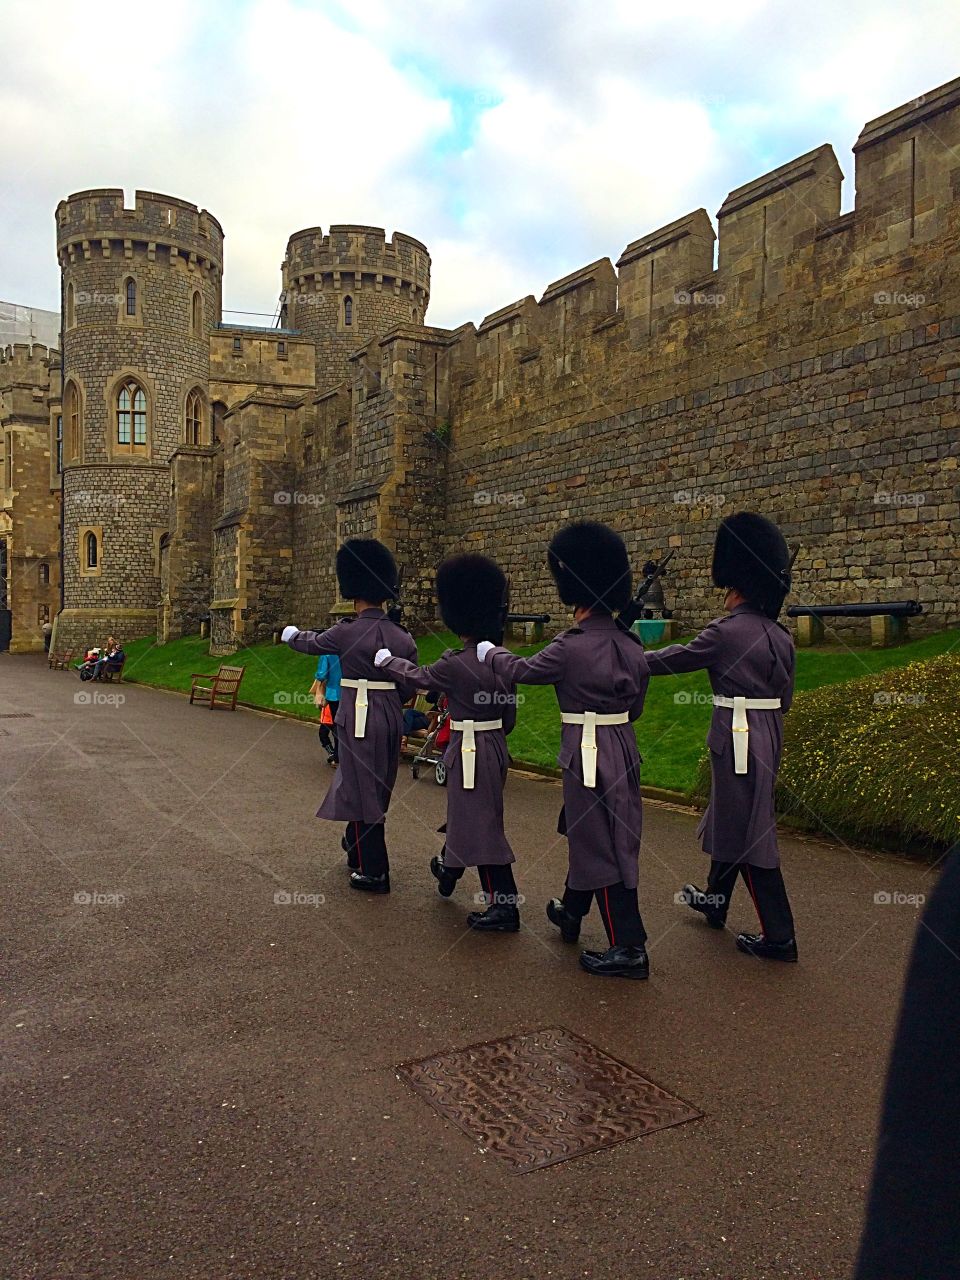 Queen's Guards. Some of the Queen's Guards marching at Windsor Castle in London, England. 